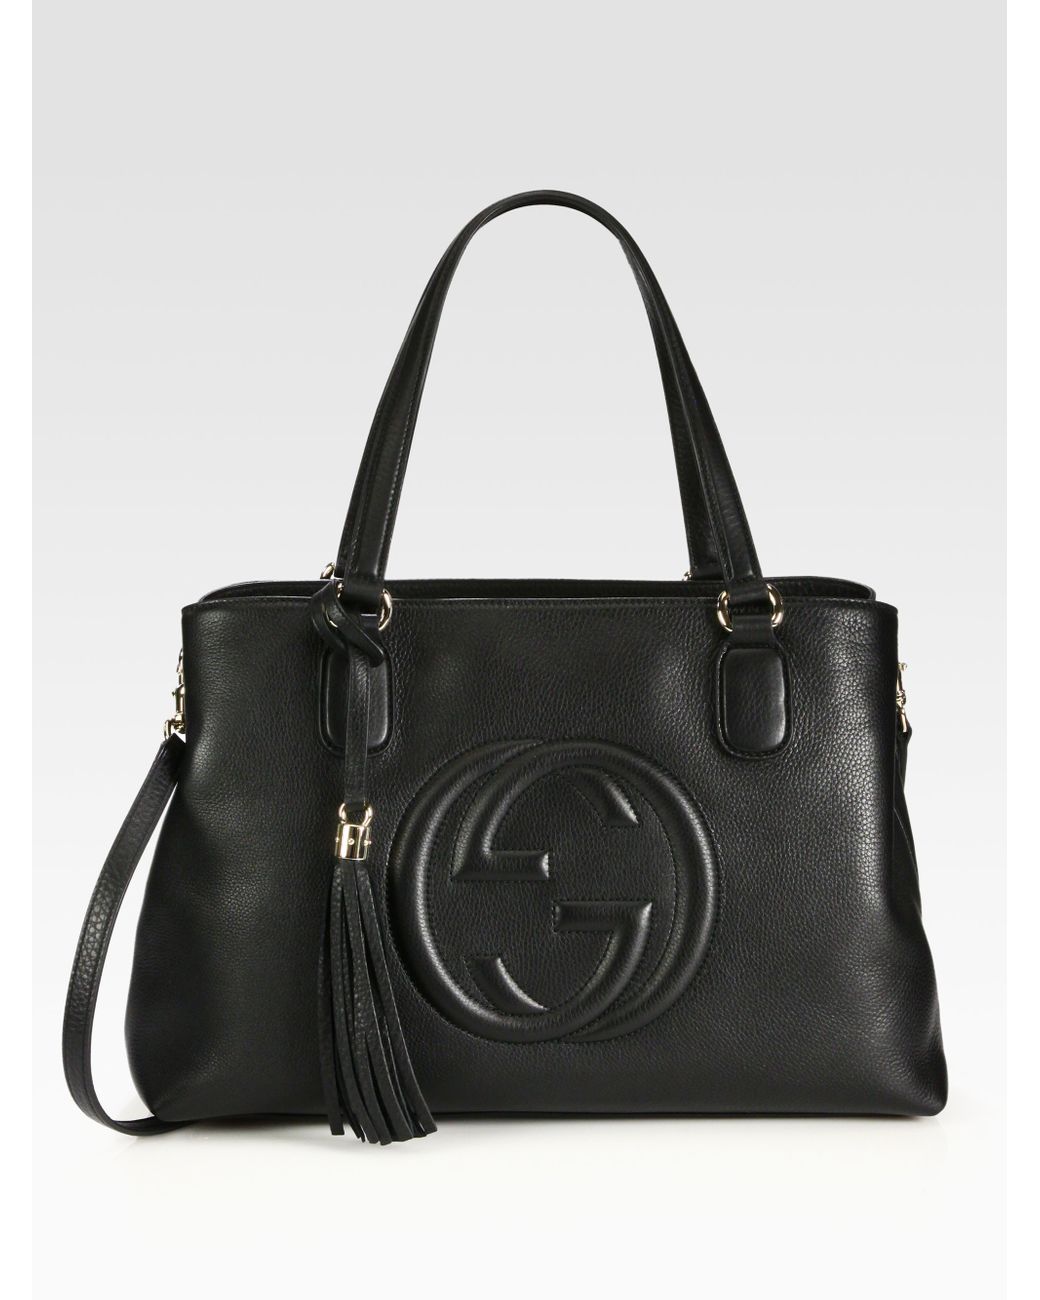 Gucci Soho Leather Working Tote in Black | Lyst